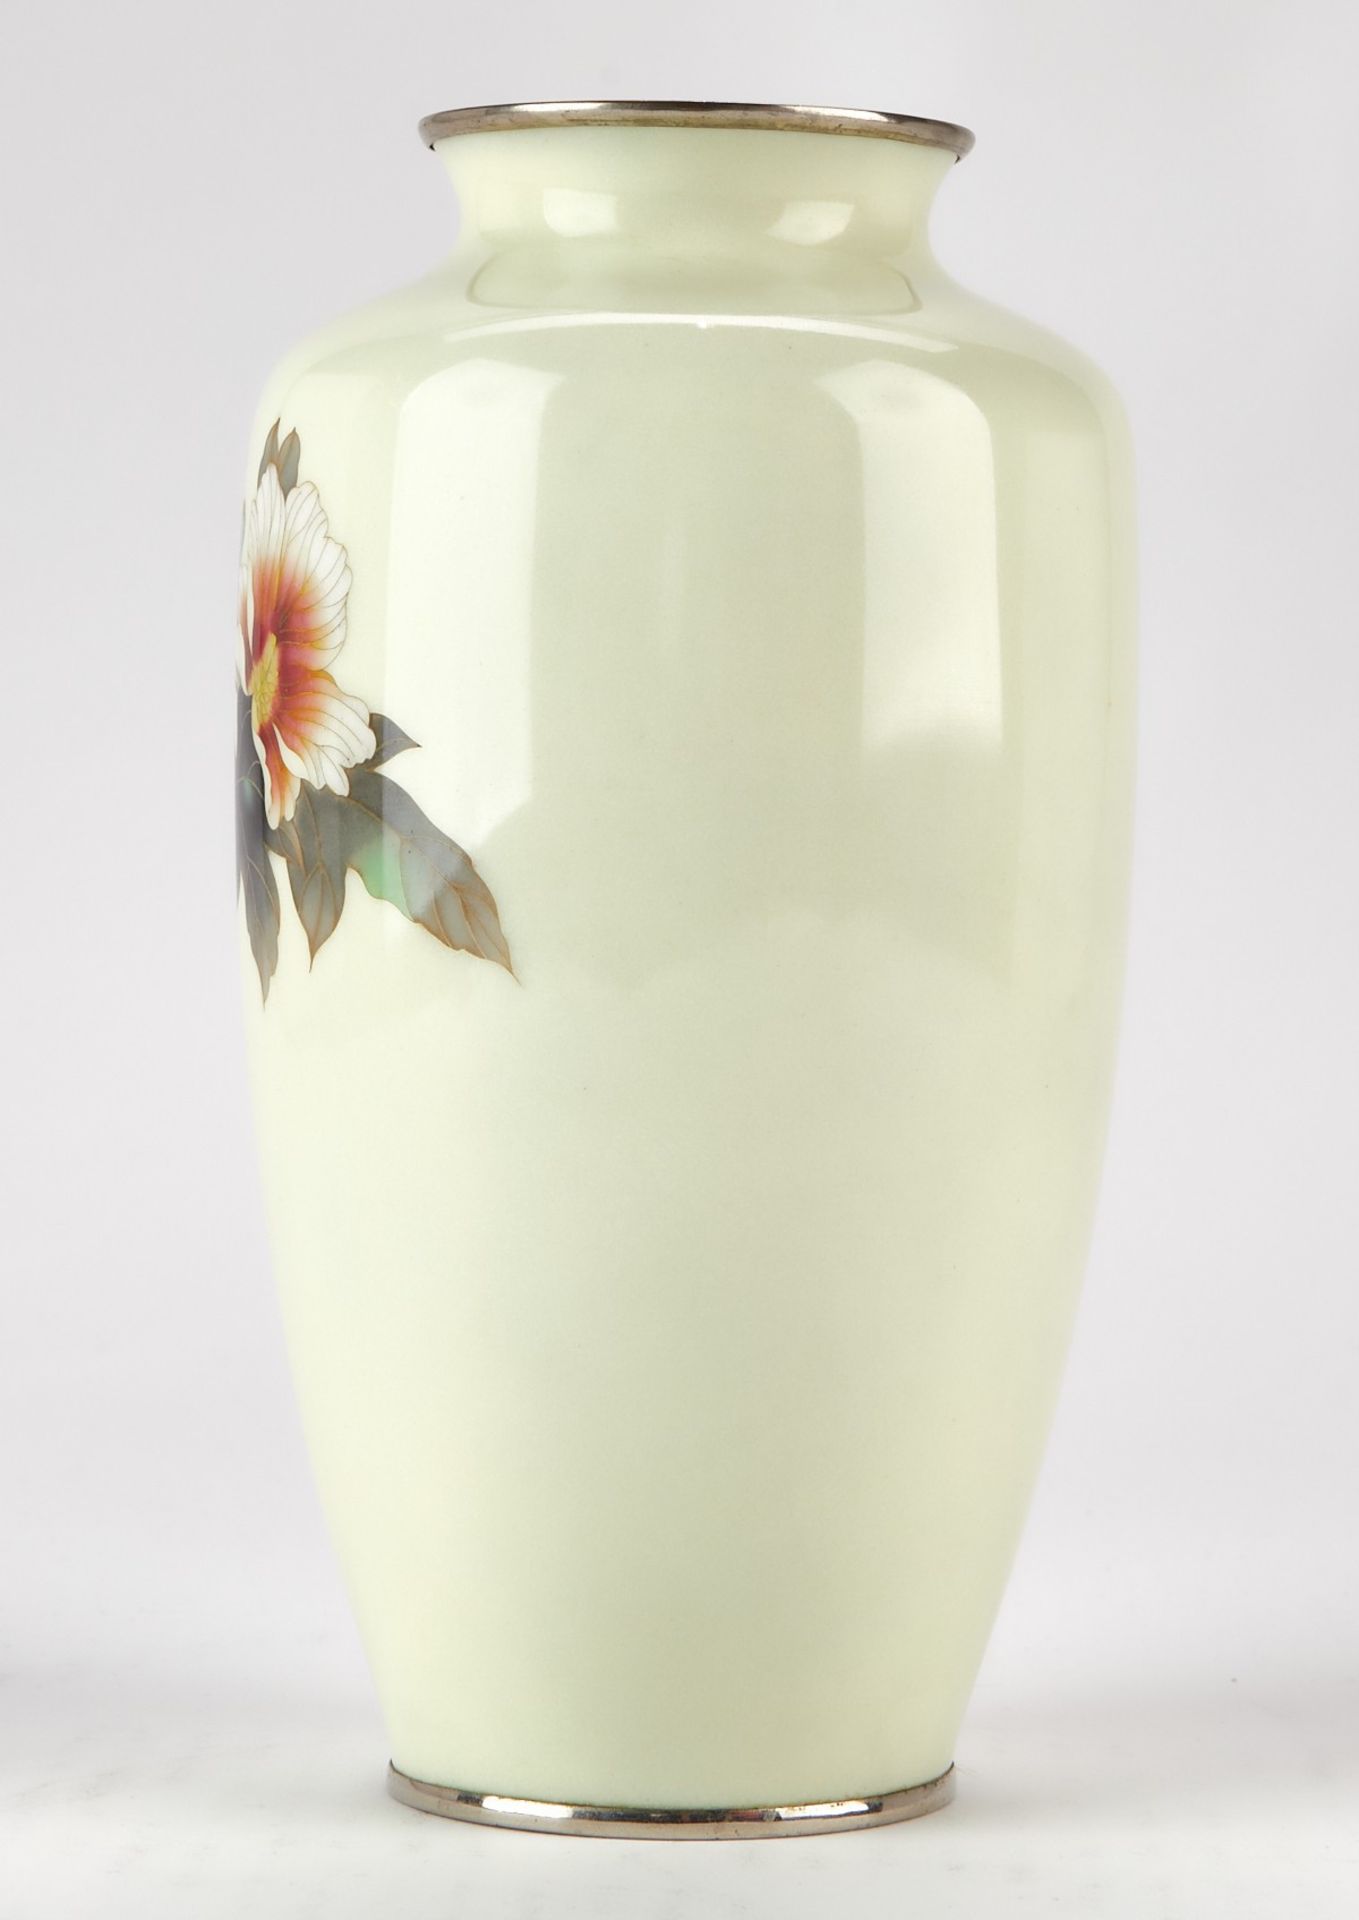 Japanese Cloisonne Vase w/ Leaves and Bird - Image 2 of 7